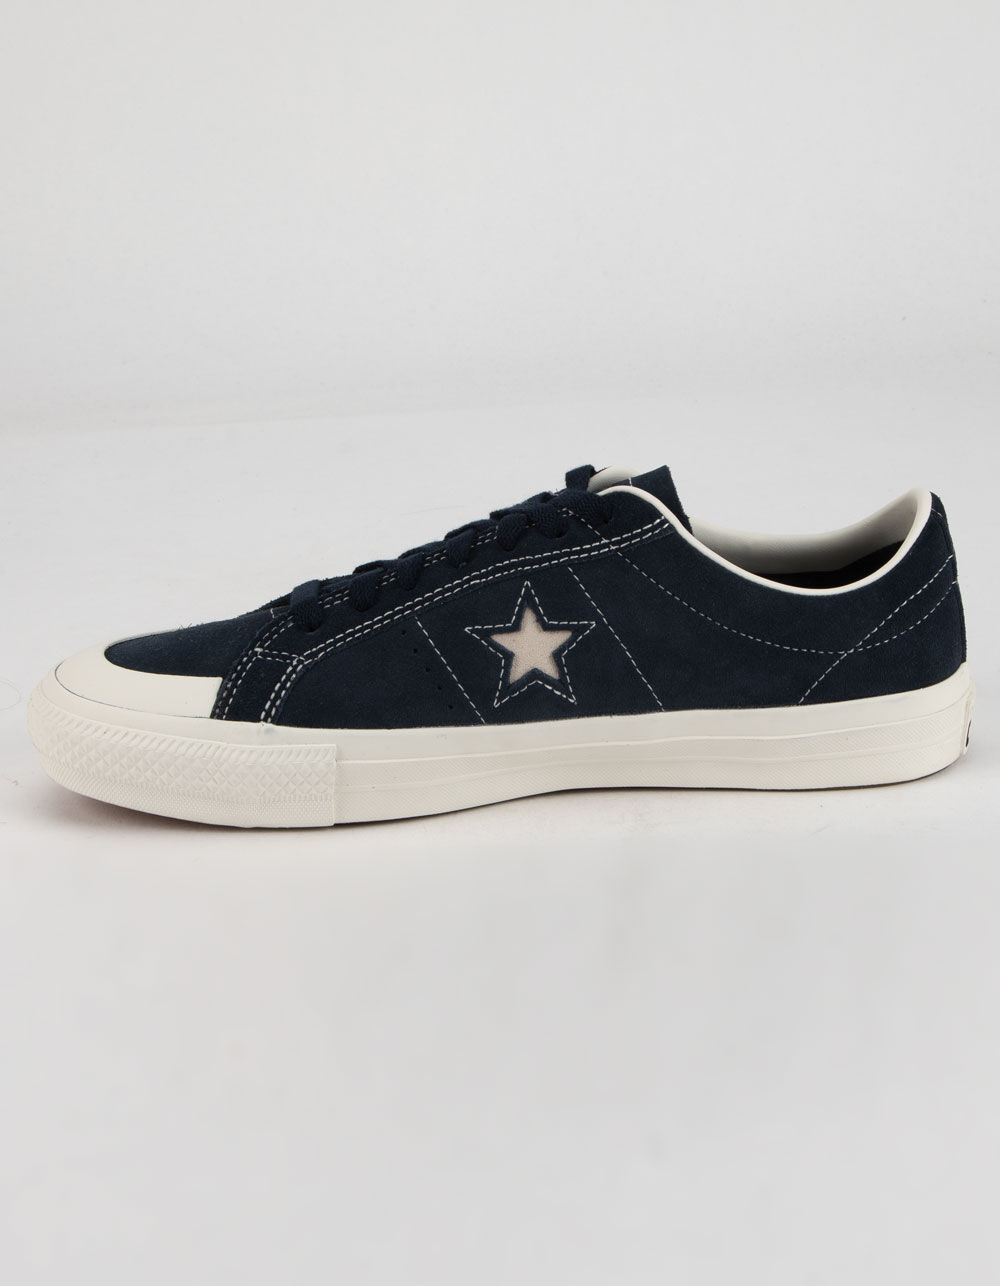 CONVERSE Alexis Sablone One Star Pro Suede Low Top Shoes - NAVY COMBO ...